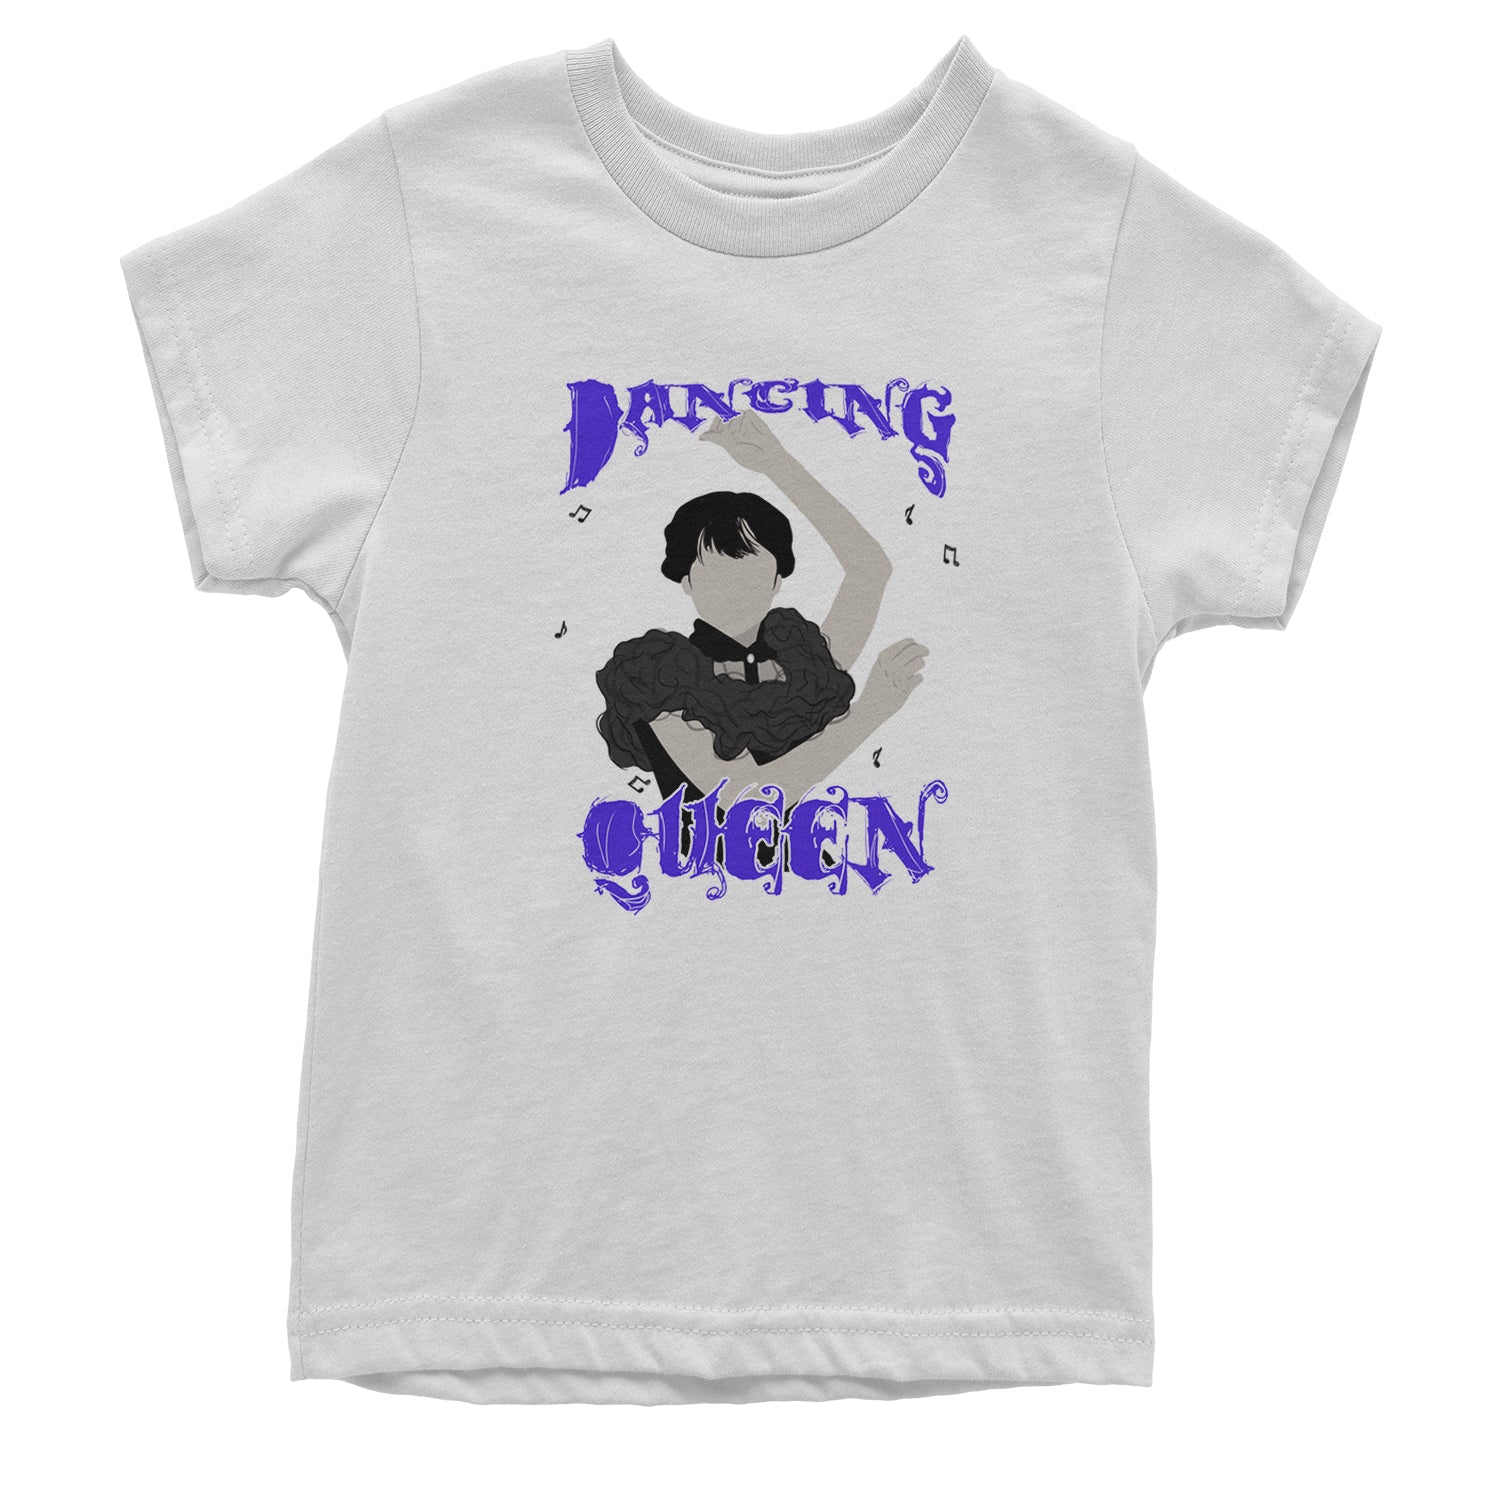 Wednesday Dancing Queen Youth T-shirt black, On, we, wear, wednesdays by Expression Tees